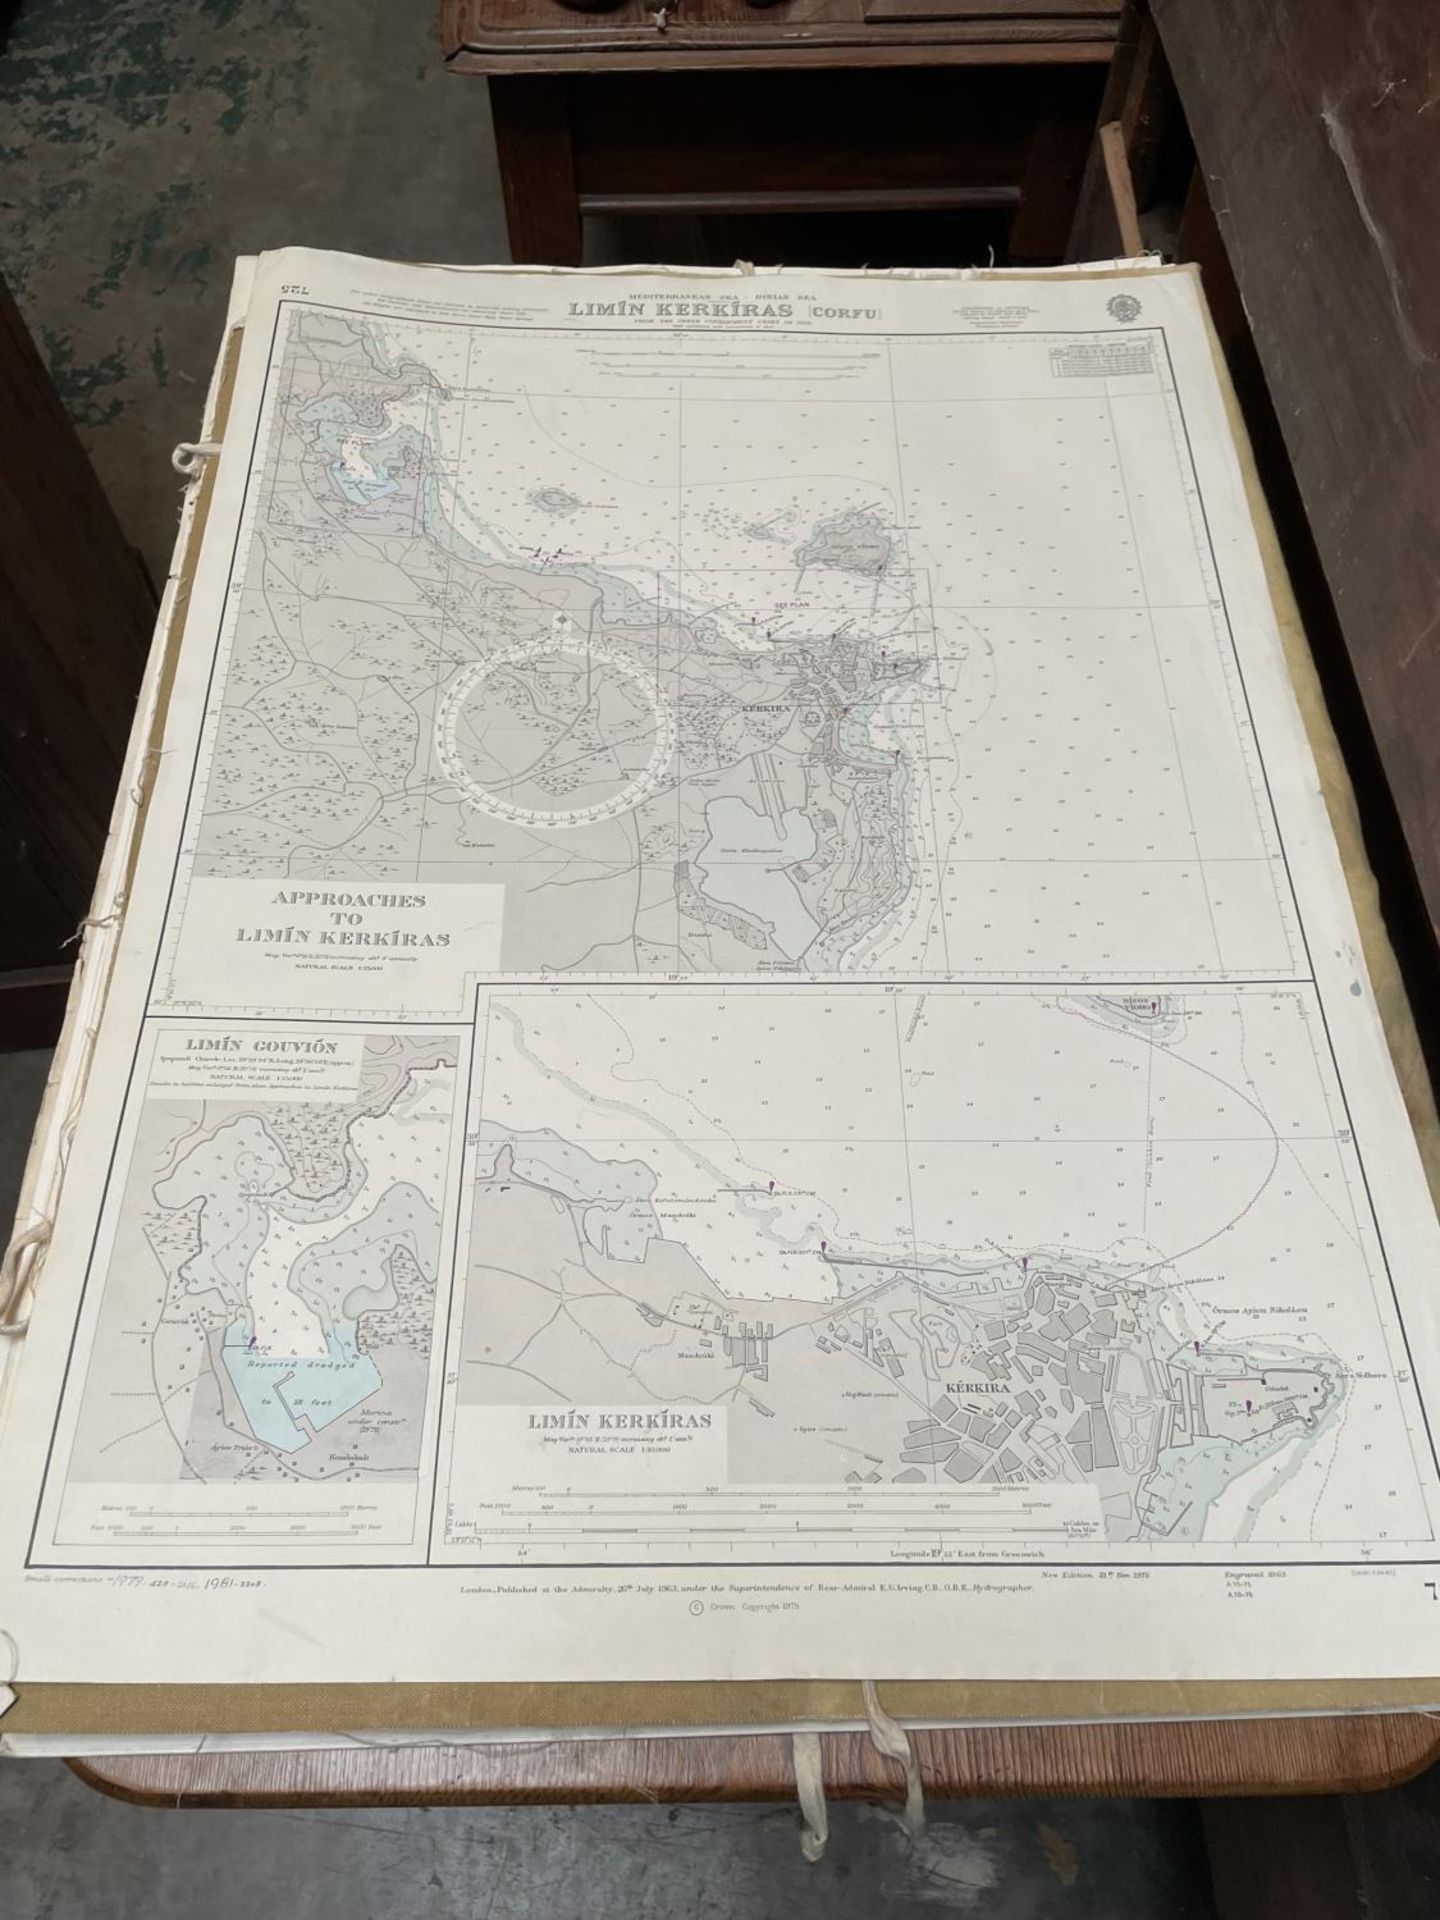 A FOLDER CONTAINING A LARGE AMOUNT OF SHIPPING CHARTS AND MAPS - Image 2 of 3